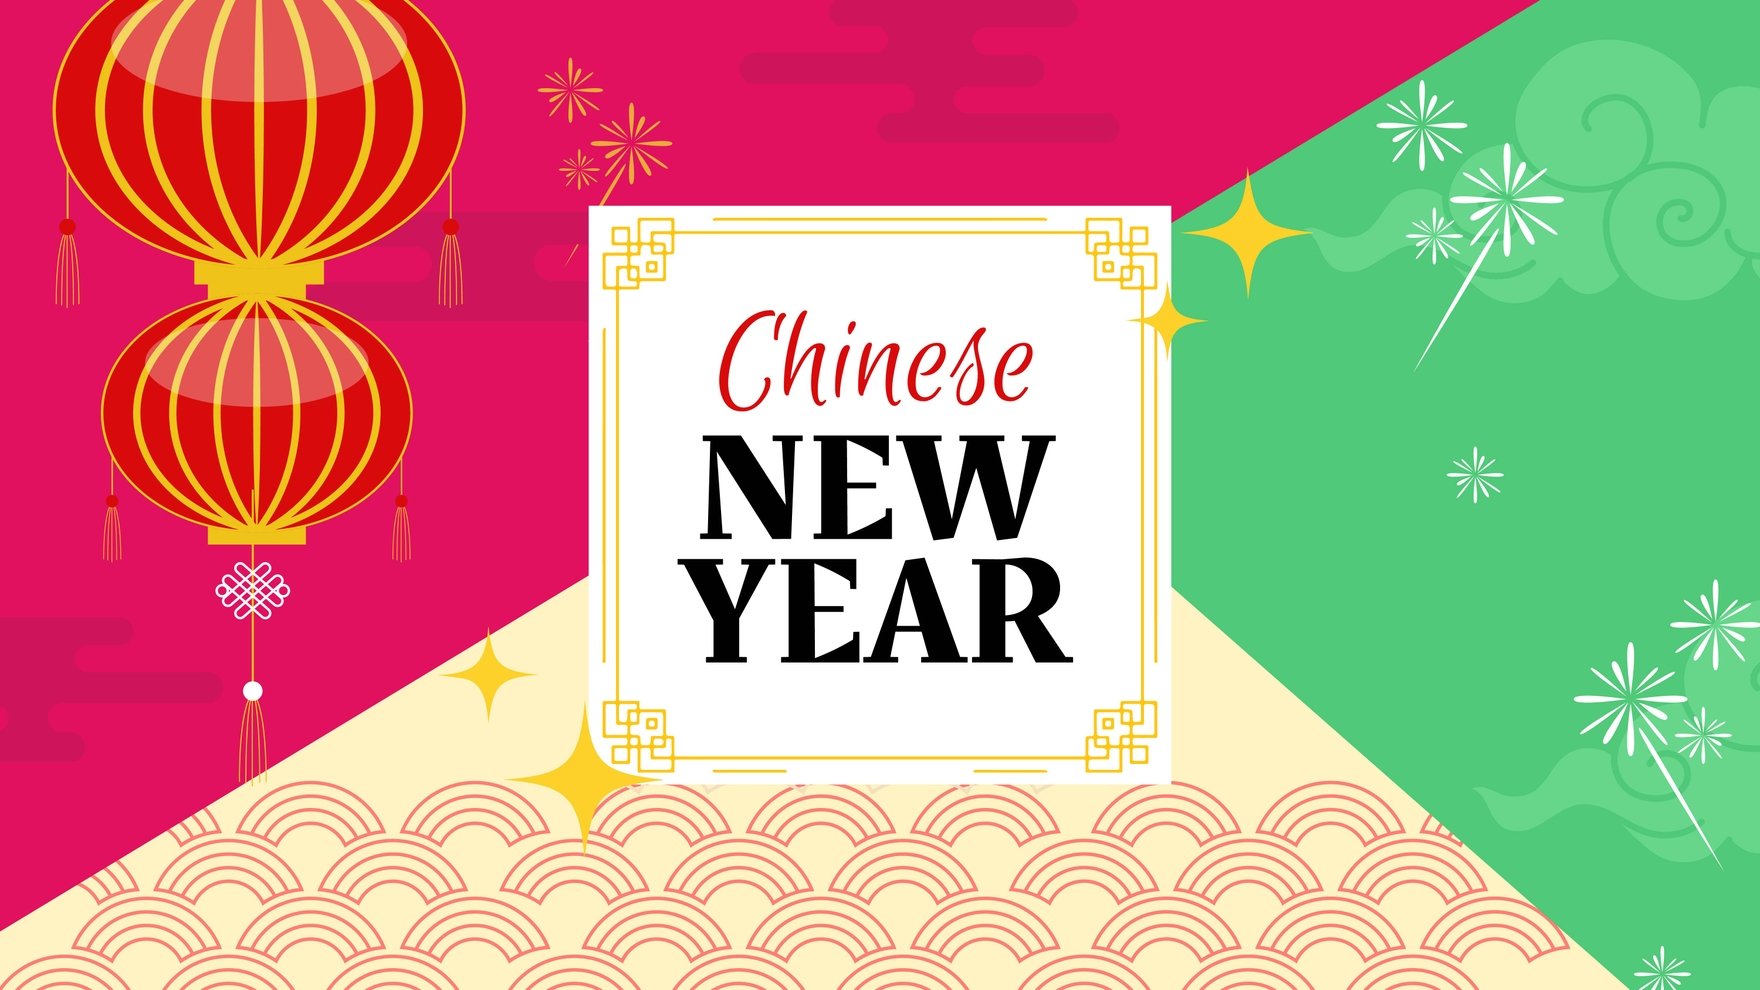 Free Chinese New Year Colorful Background - EPS, Illustrator, JPG, PSD,  PNG, PDF, SVG 